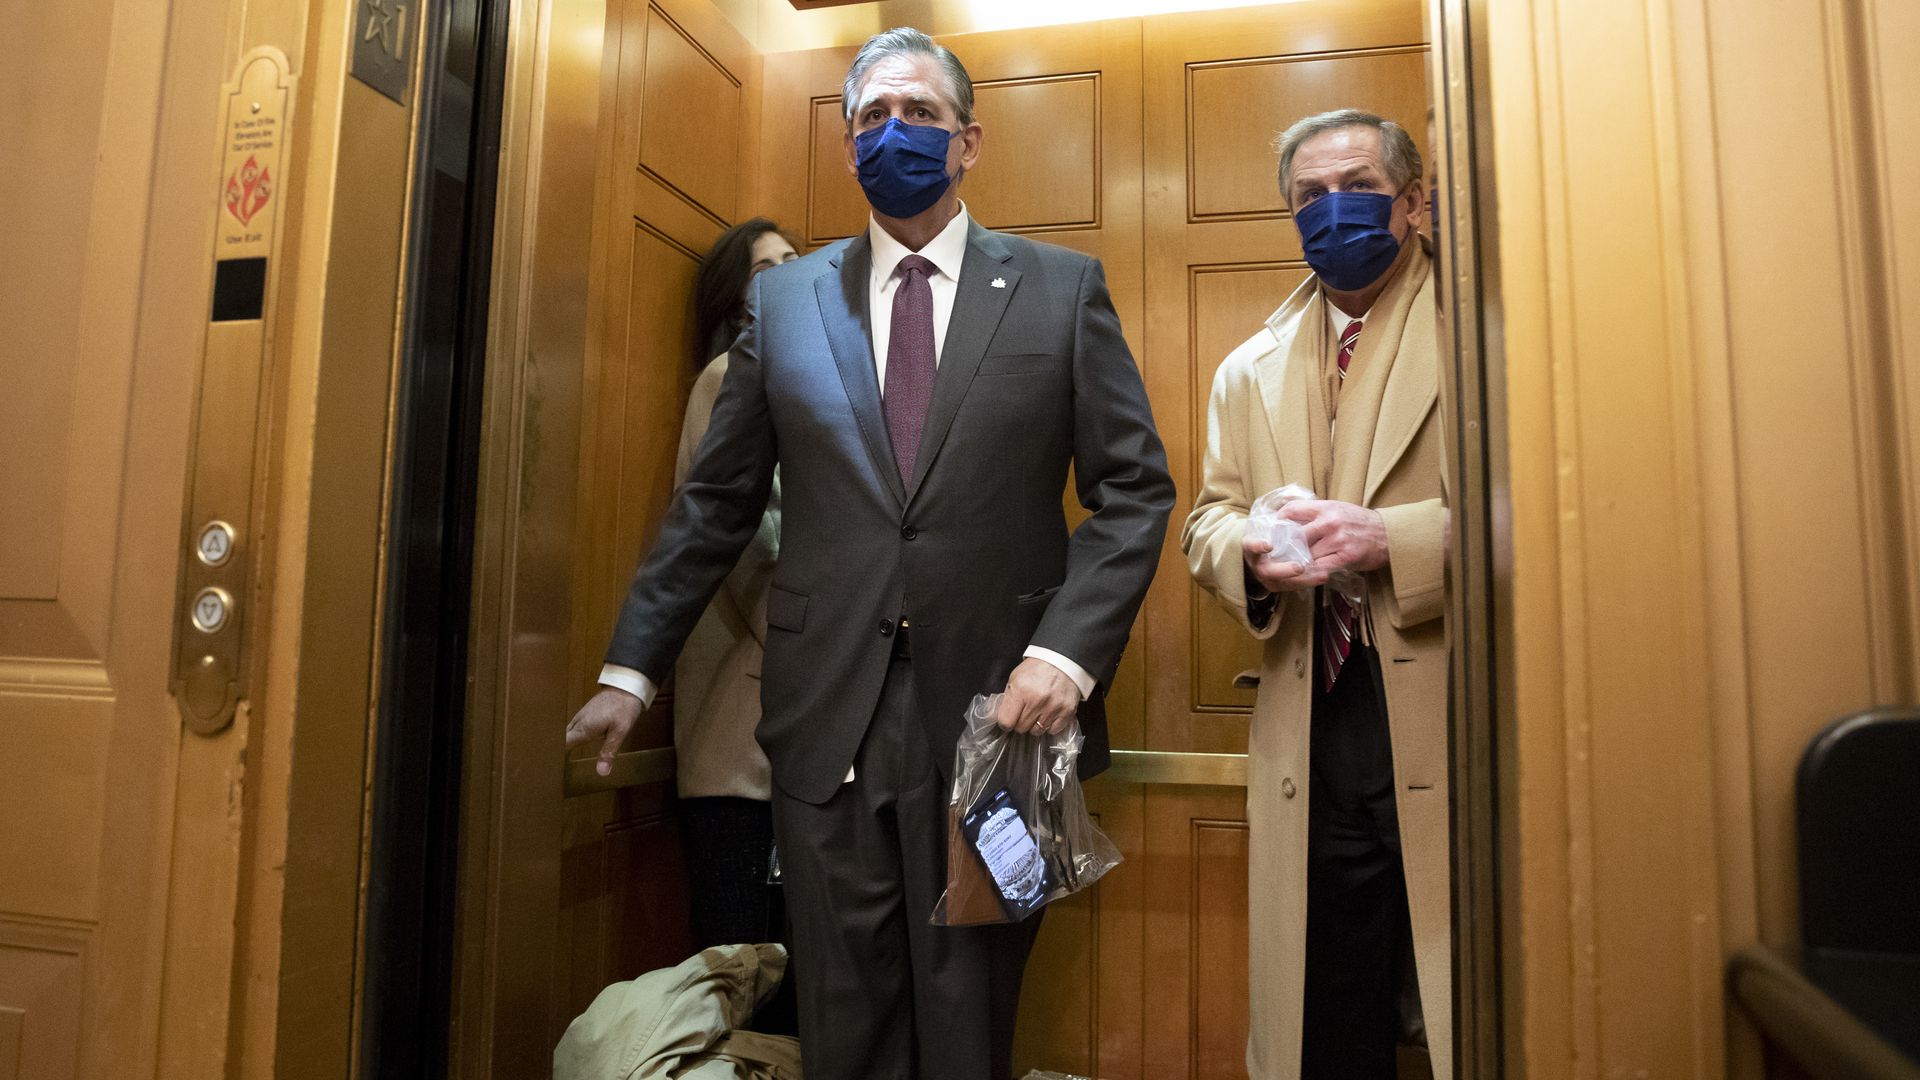 Two of former President Trump's defense attorneys are seen in a Senate elevator.